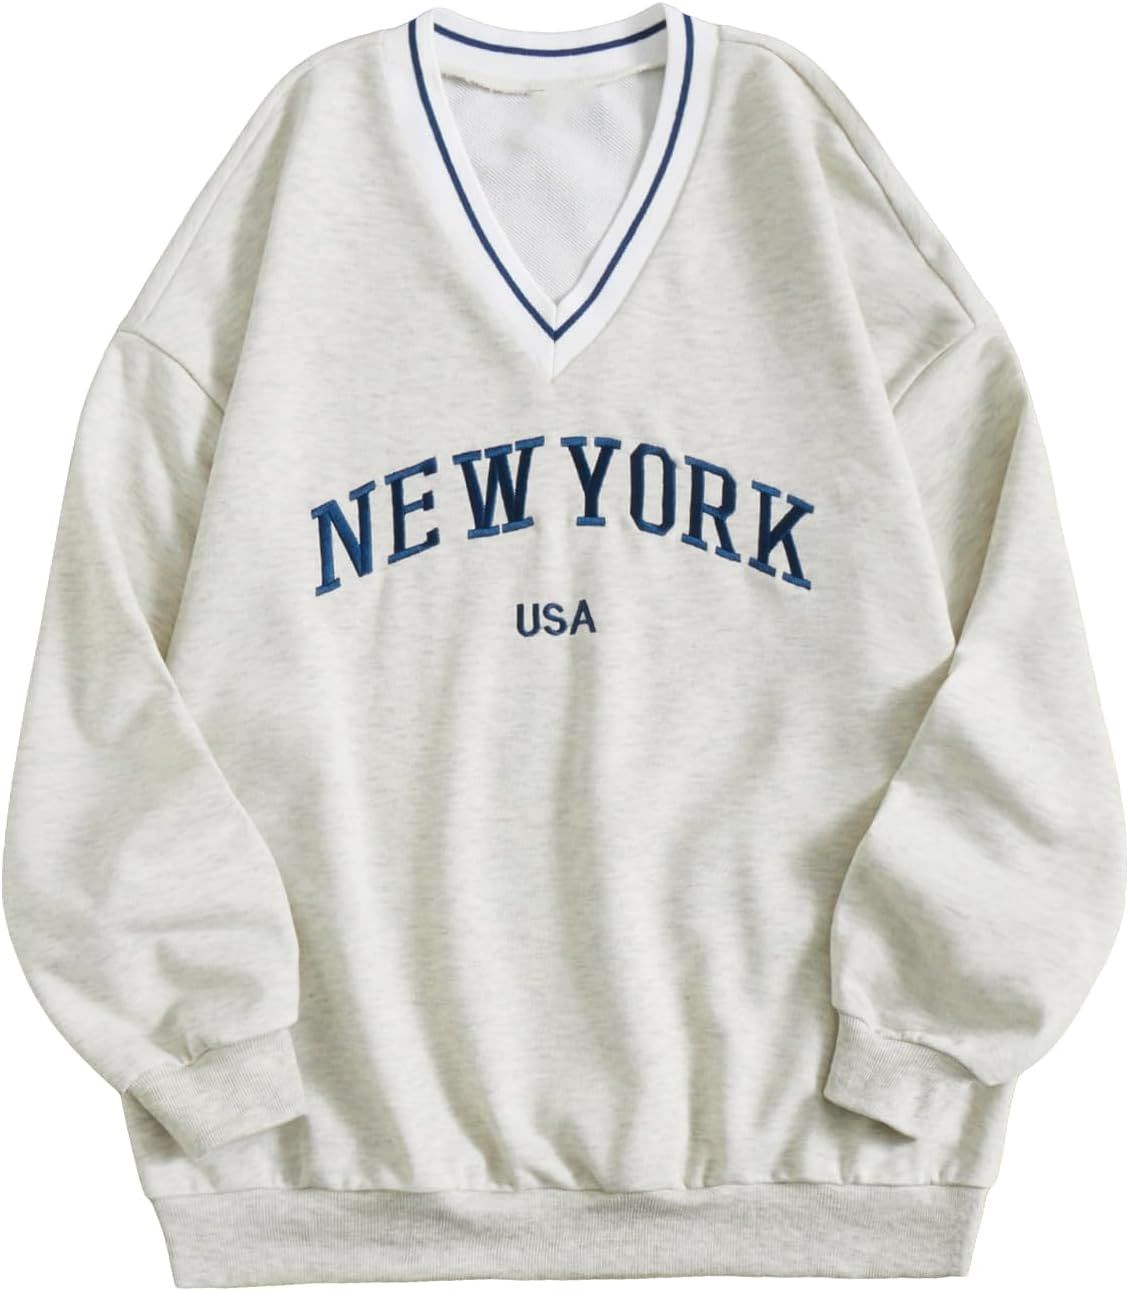 SOLY HUX Women's New York Letter Graphic Sweatshirt V Neck Long Sleeve Casual Pullover Top | Amazon (US)